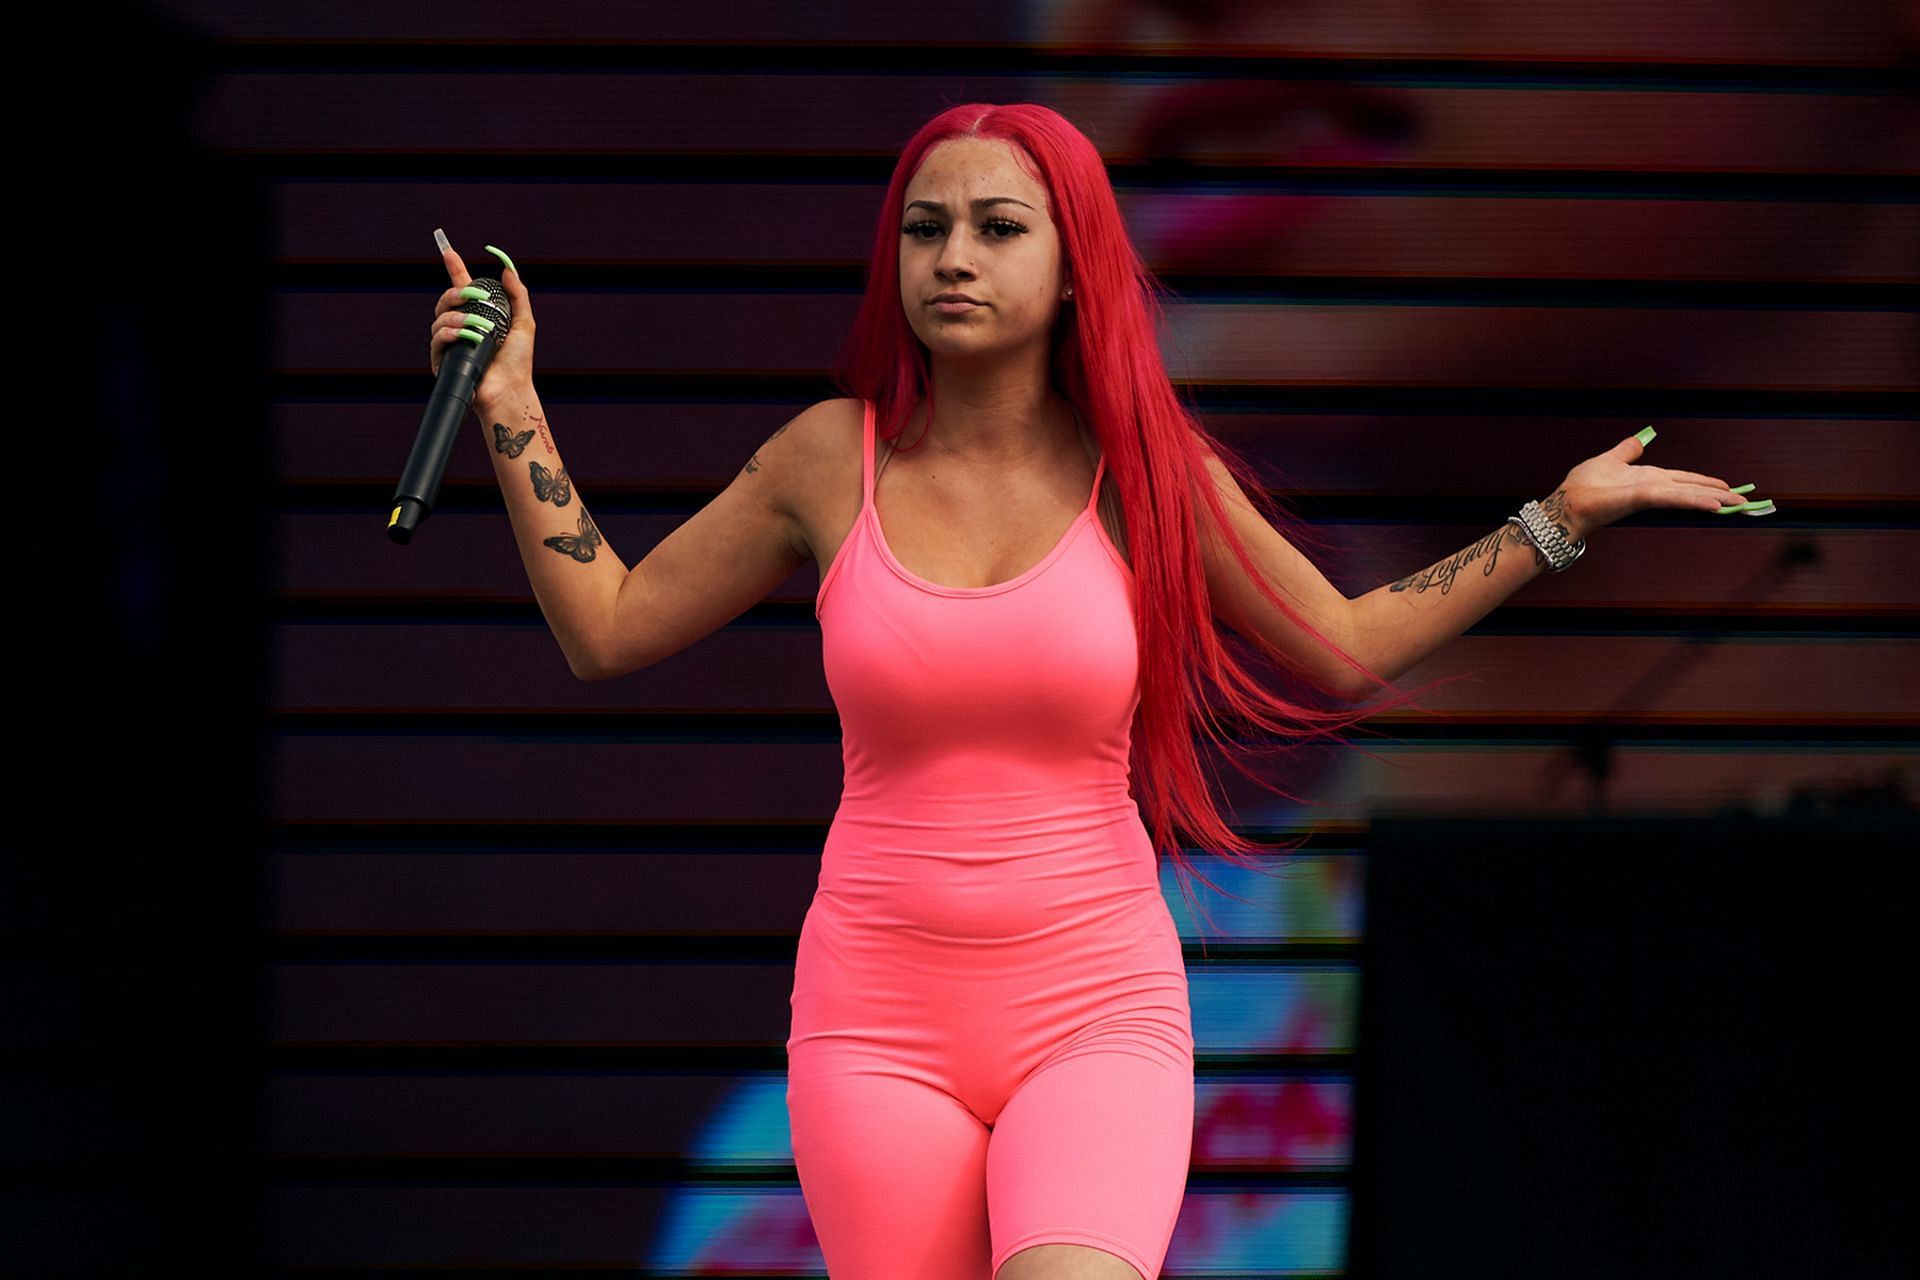 Bhad Bhabie invited to Oxford University (Image via Getty Images)